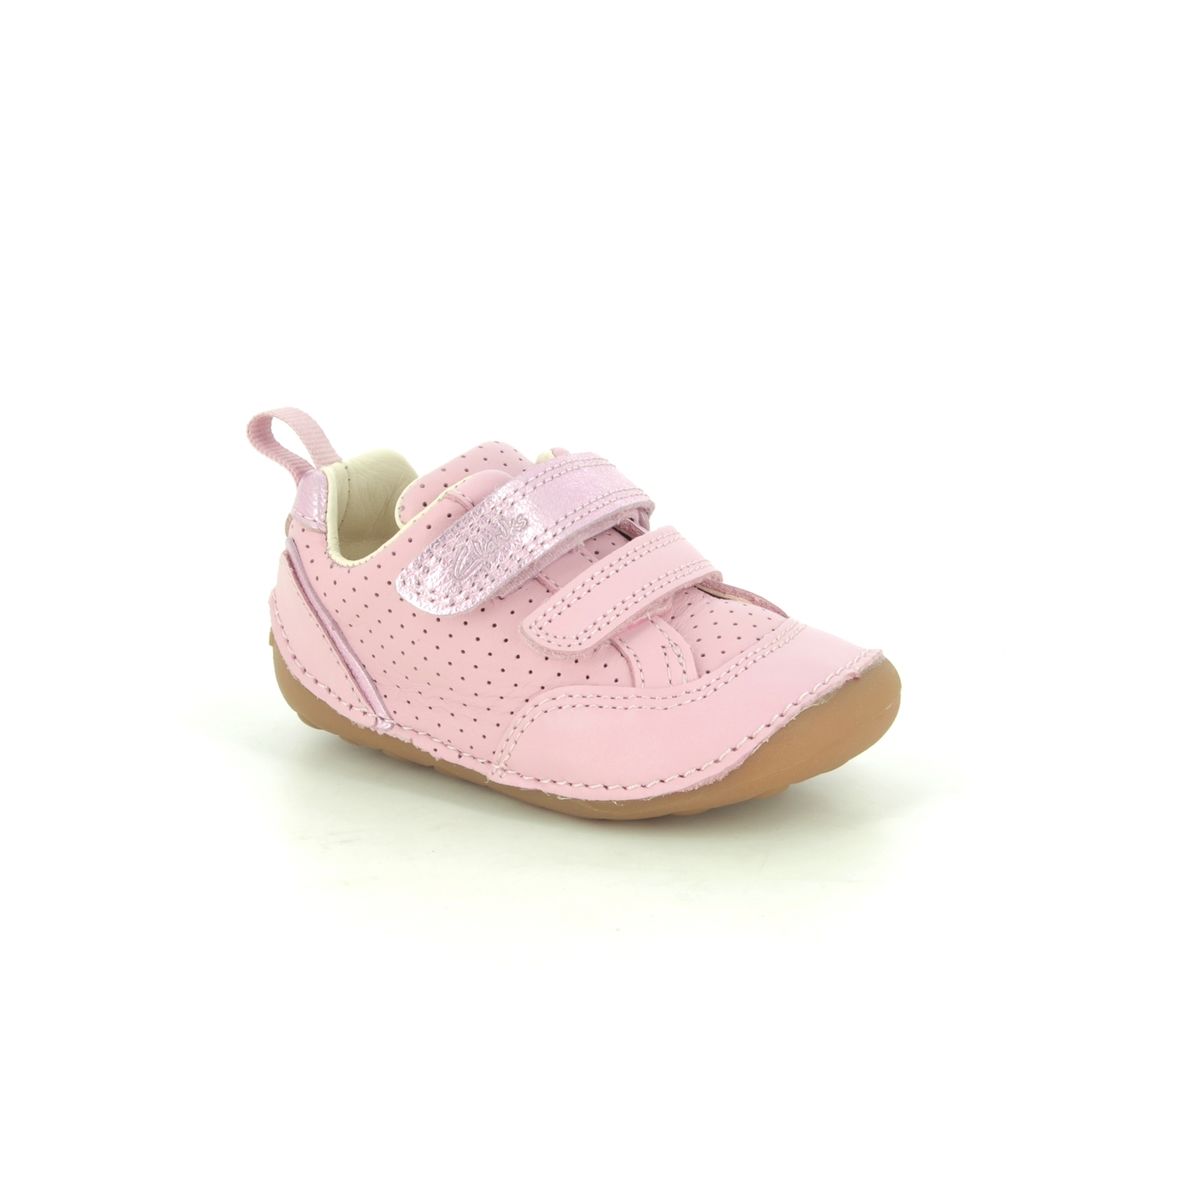 Clarks Tiny Sky T Pink Leather Kids Girls First And Baby Shoes 576286F In Size 4 In Plain Pink Leather F Width Fitting Regular Fit For kids